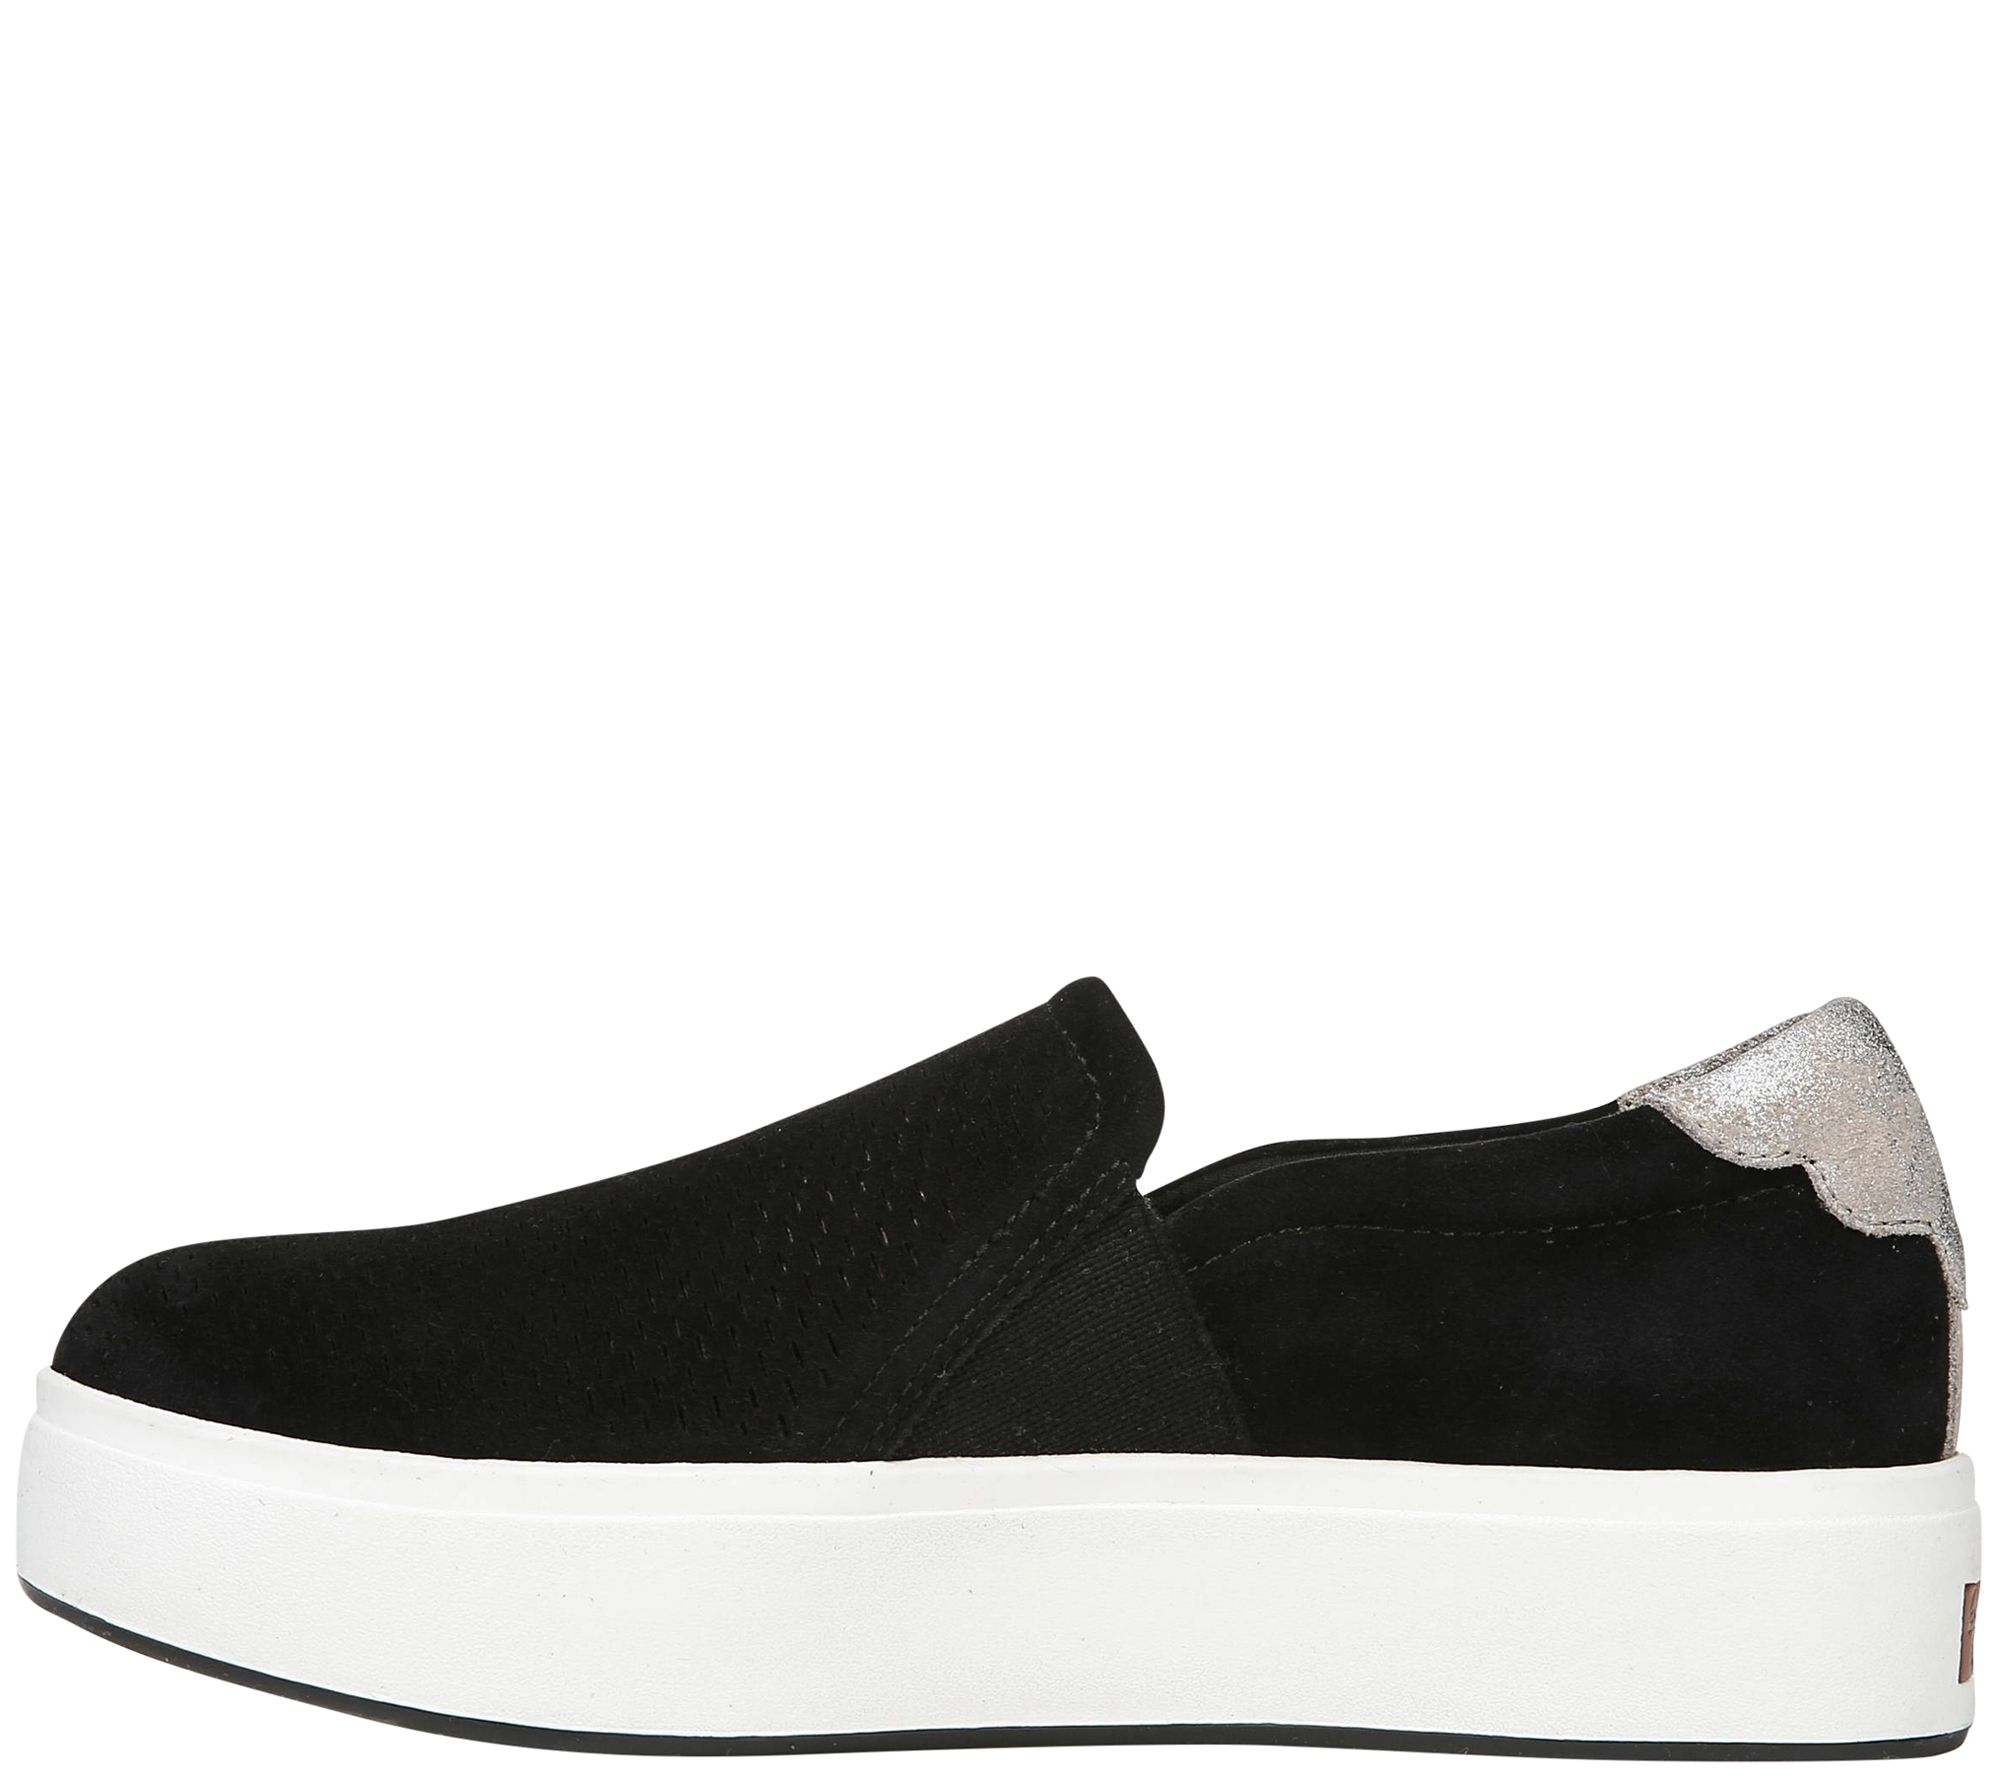 Dr. Scholl's Sporty Suede Slip-On Sneakers - Abbot Lux - QVC.com